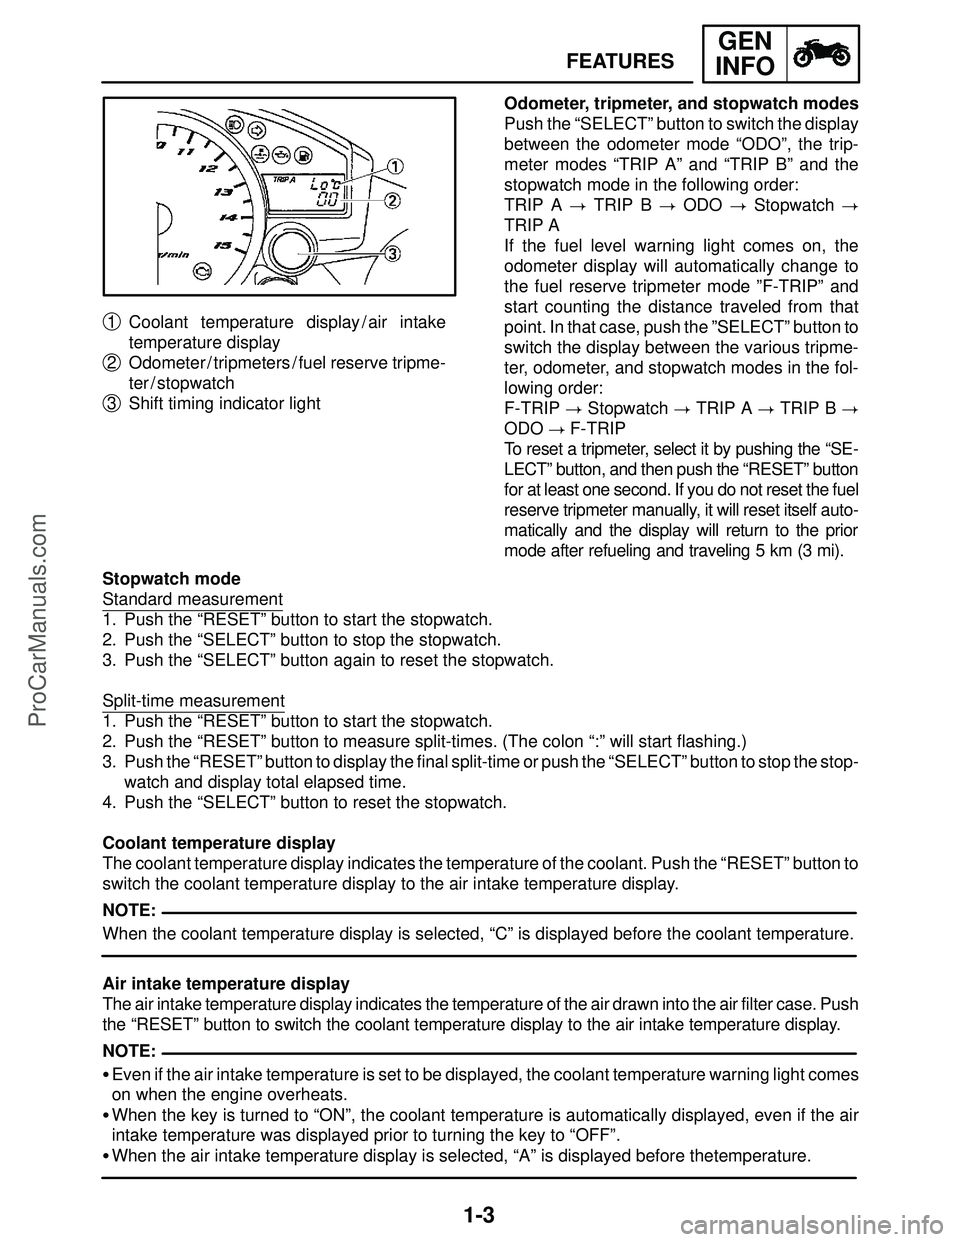 YAMAHA YZF-R1S 2004  Service Manual 1-3
FEATURES
GEN
INFO
1 Coolant temperature display / air intake
temperature display
2 Odometer / tripmeters / fuel reserve tripme-
ter / stopwatch
3 Shift timing indicator light
NOTE:
NOTE:Odometer, 